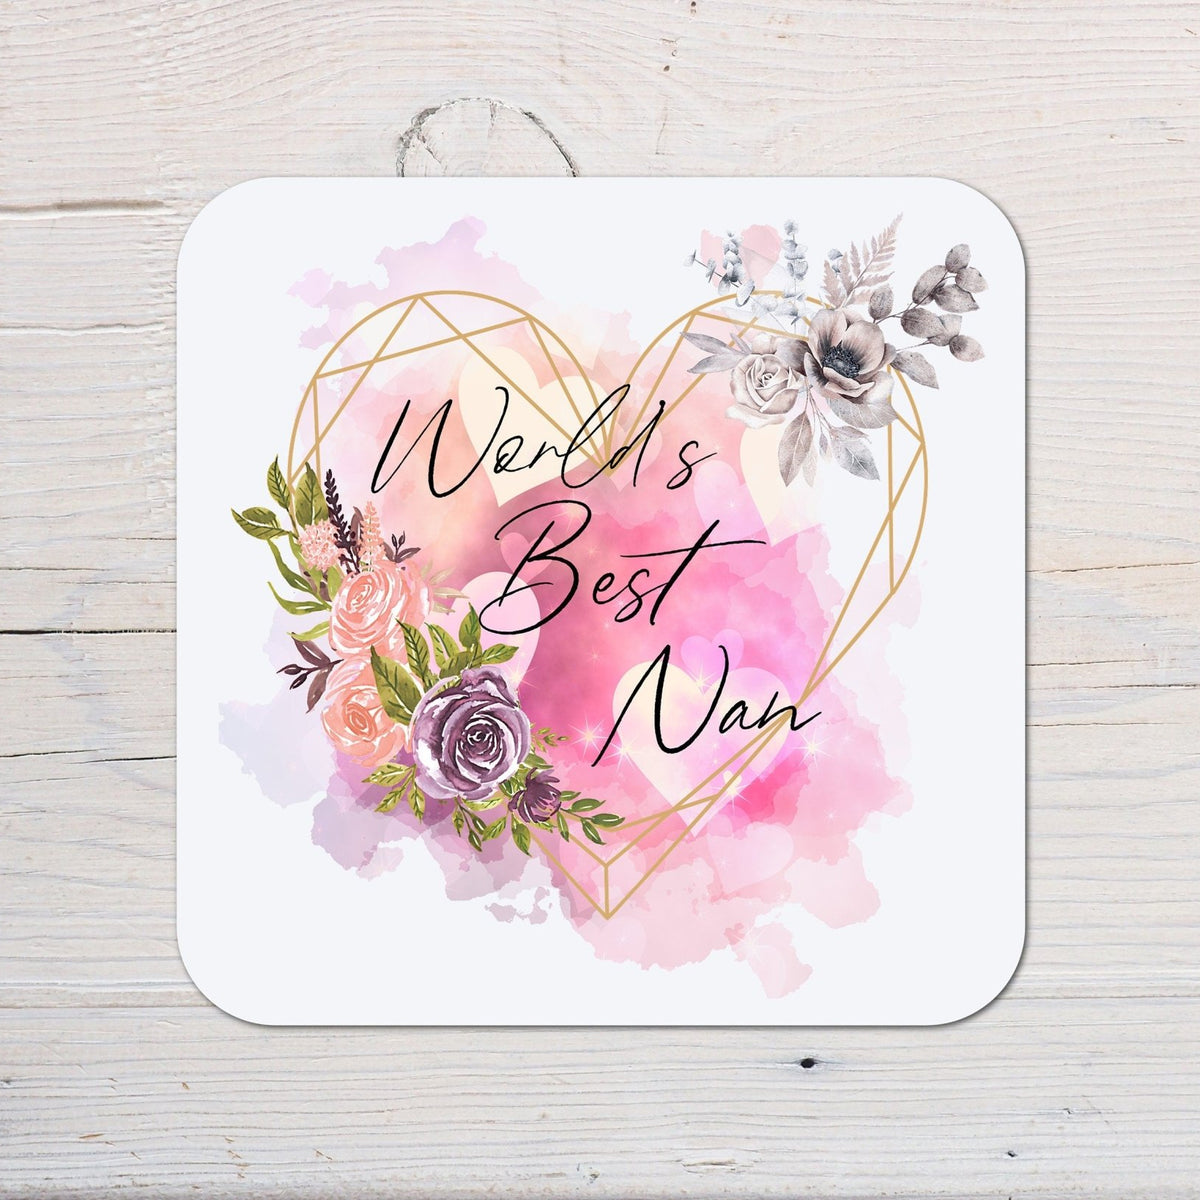 World's Best Nan Coaster personalised with any wording - Rainbowprint.uk